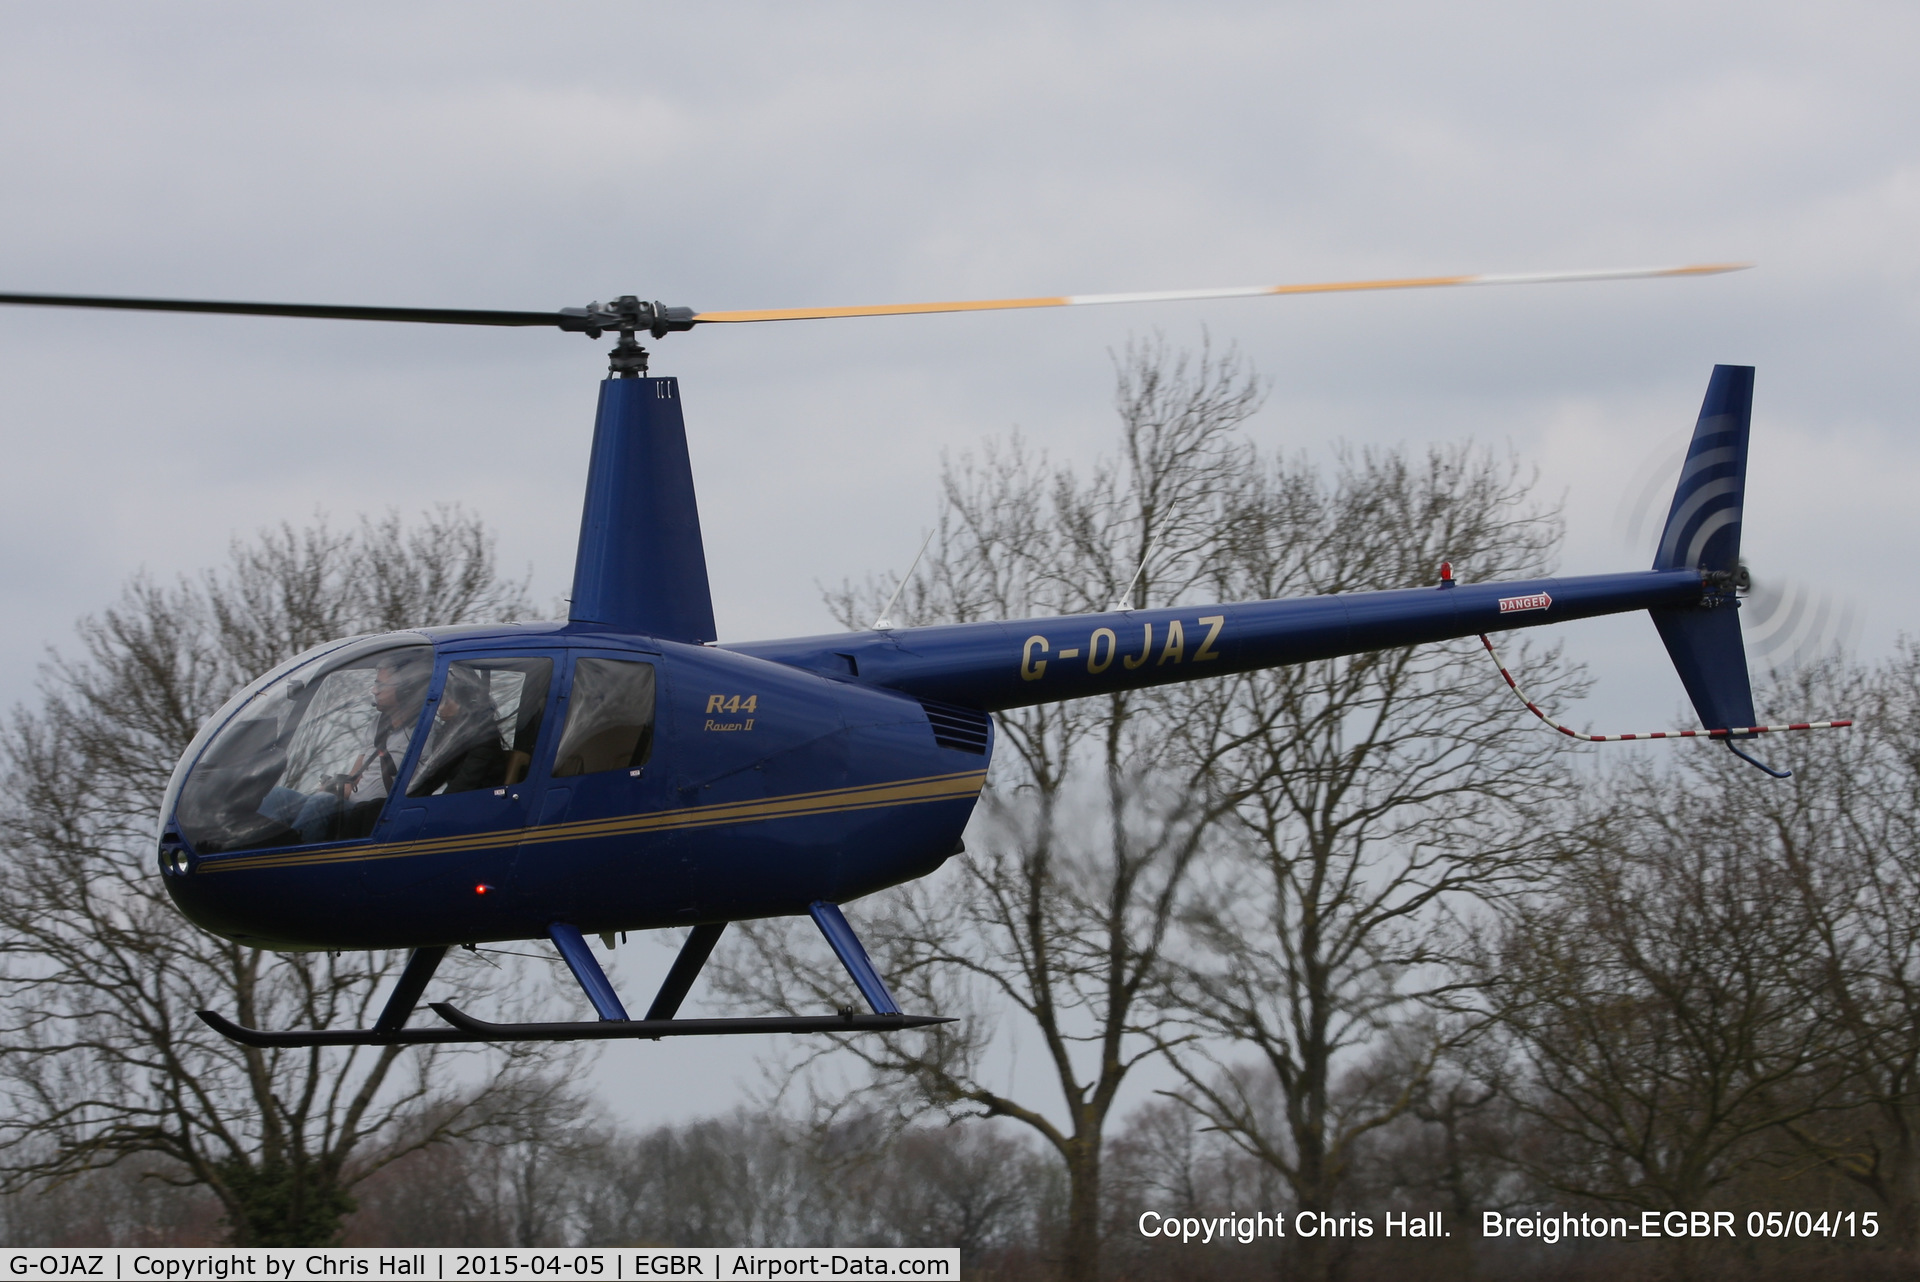 G-OJAZ, 2006 Robinson R44 Raven II C/N 11216, at the Easter Homebuilt Aircraft Fly-in